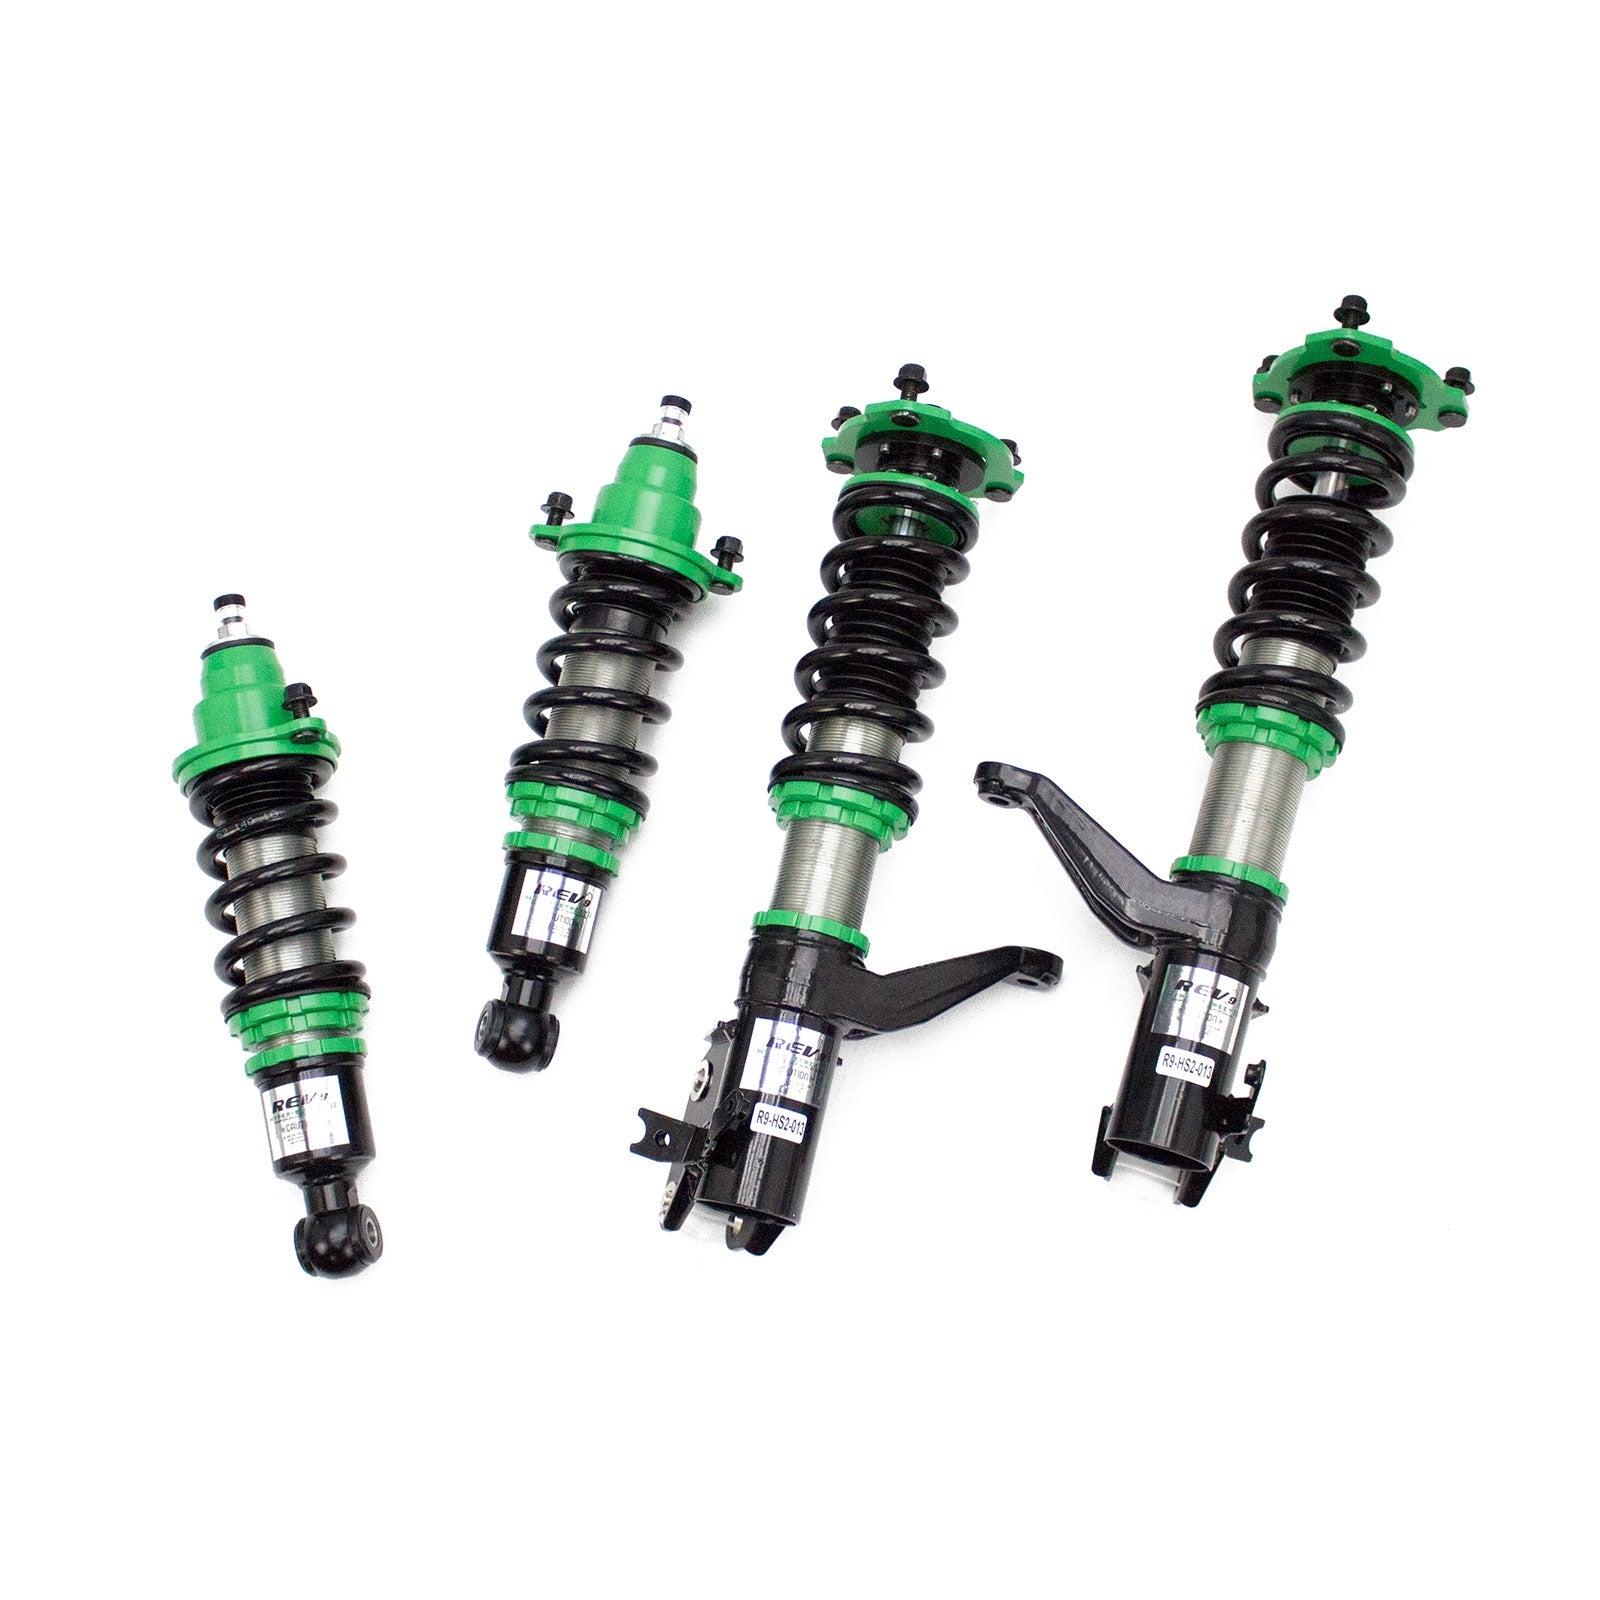 R9-HS2-013_1, Acura RSX(DC5) 2002-06 Hyper-Street II Coilover Suspension Lowering Kit, Mono-Tube Shock w/ 32 Click Rebound Setting, Full Length Adjustable